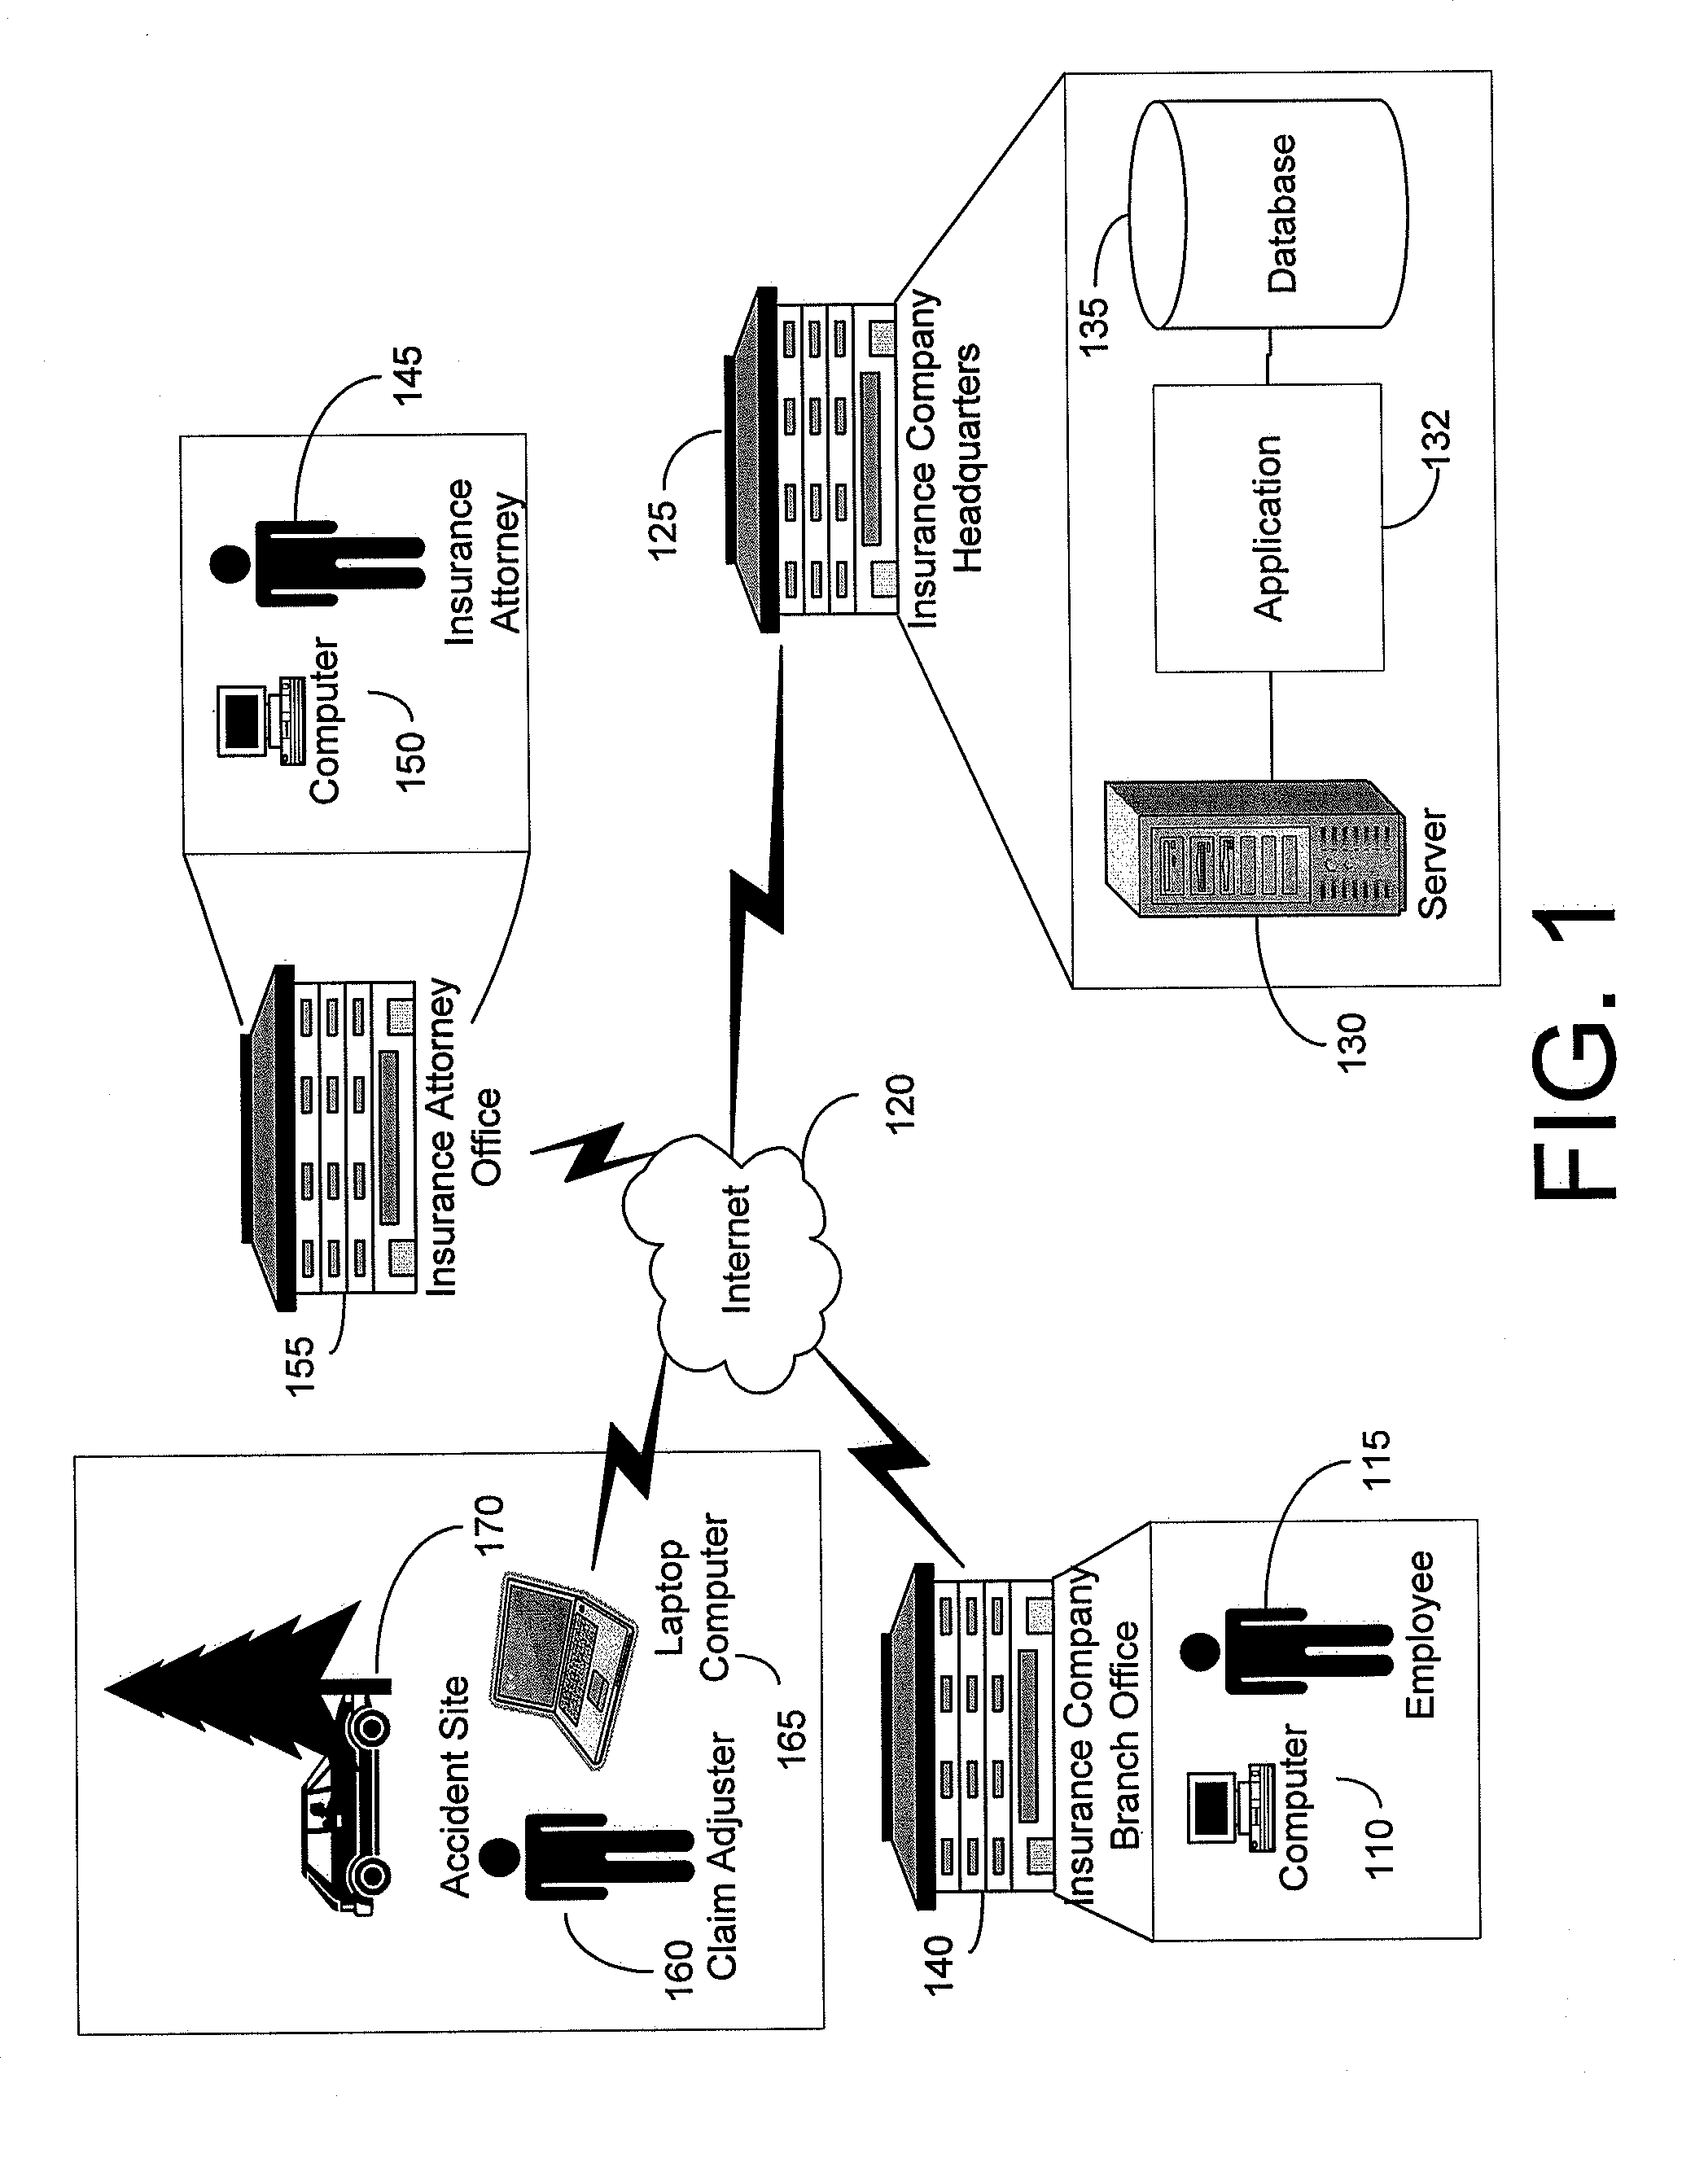 System and method for managing a business process and business process content